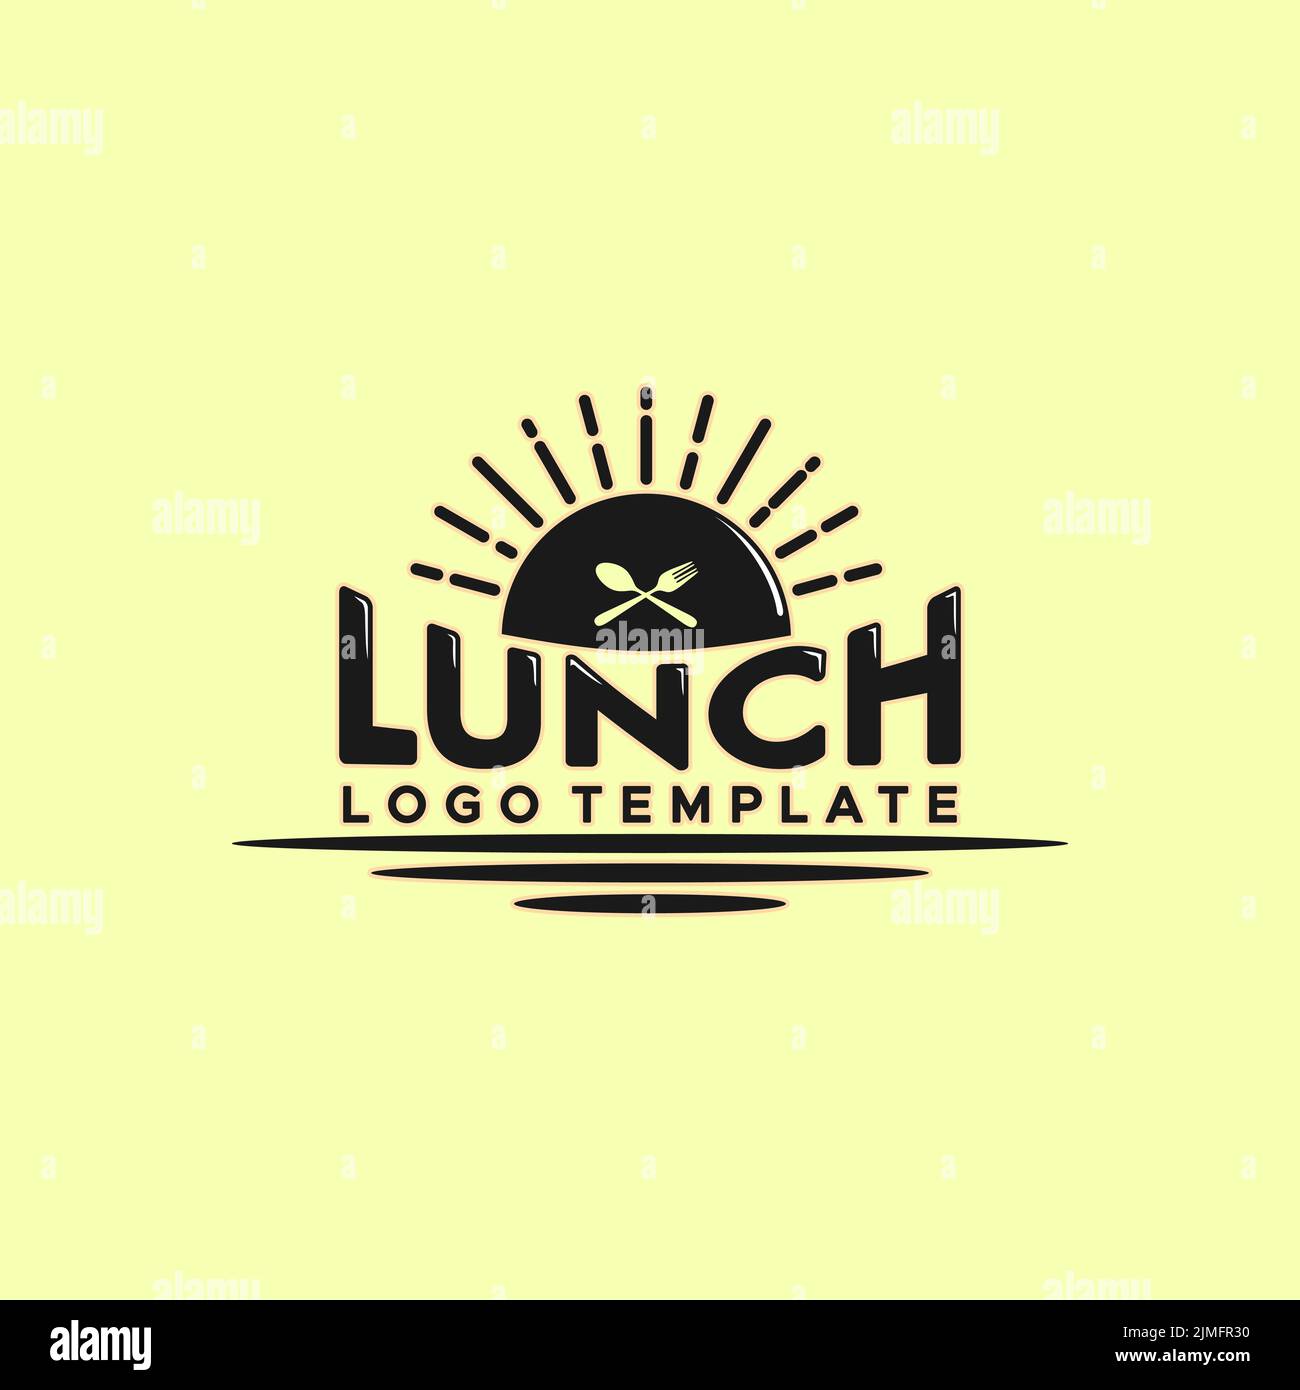 Lettering Lunch With Sun Fork Spoon Icon For Restaurant Logo Template Stock Vector